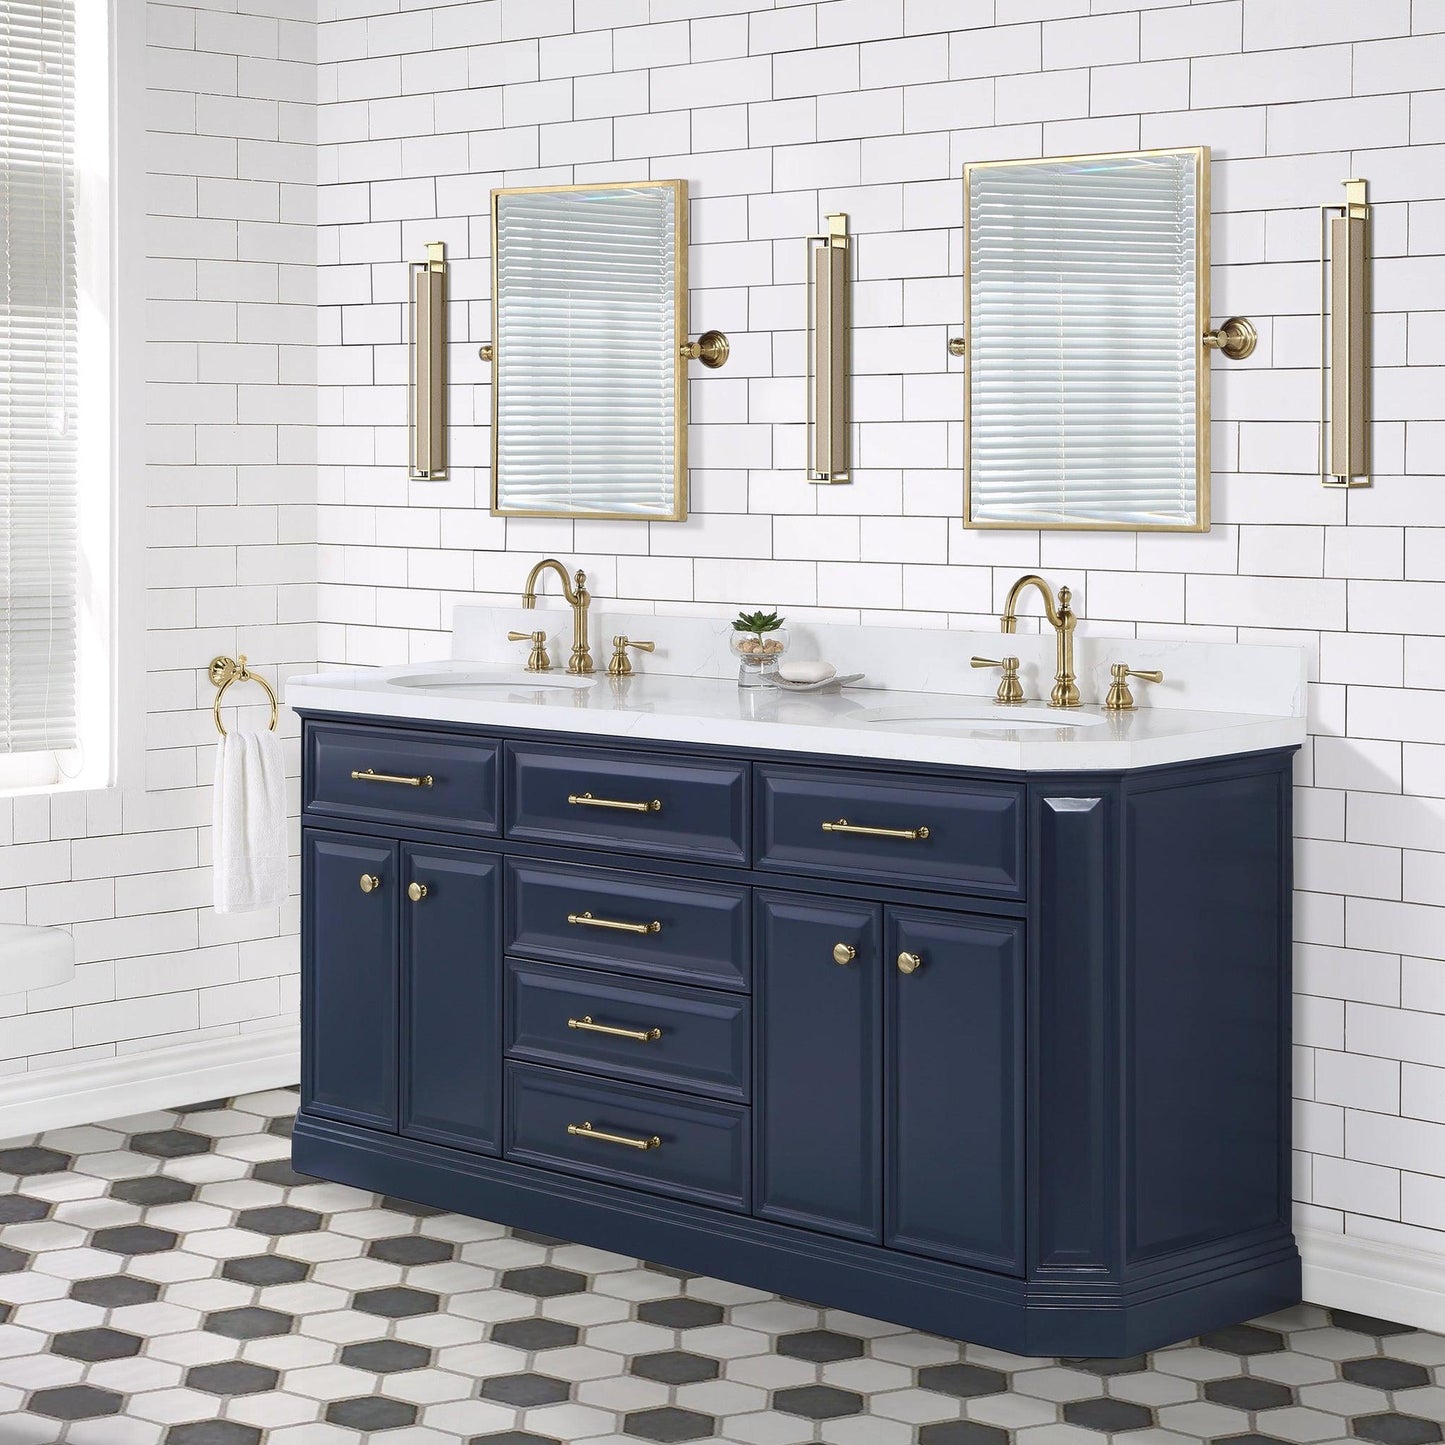 Water Creation Palace 72" Double Sink White Quartz Countertop Vanity in Monarch Blue and Mirrors